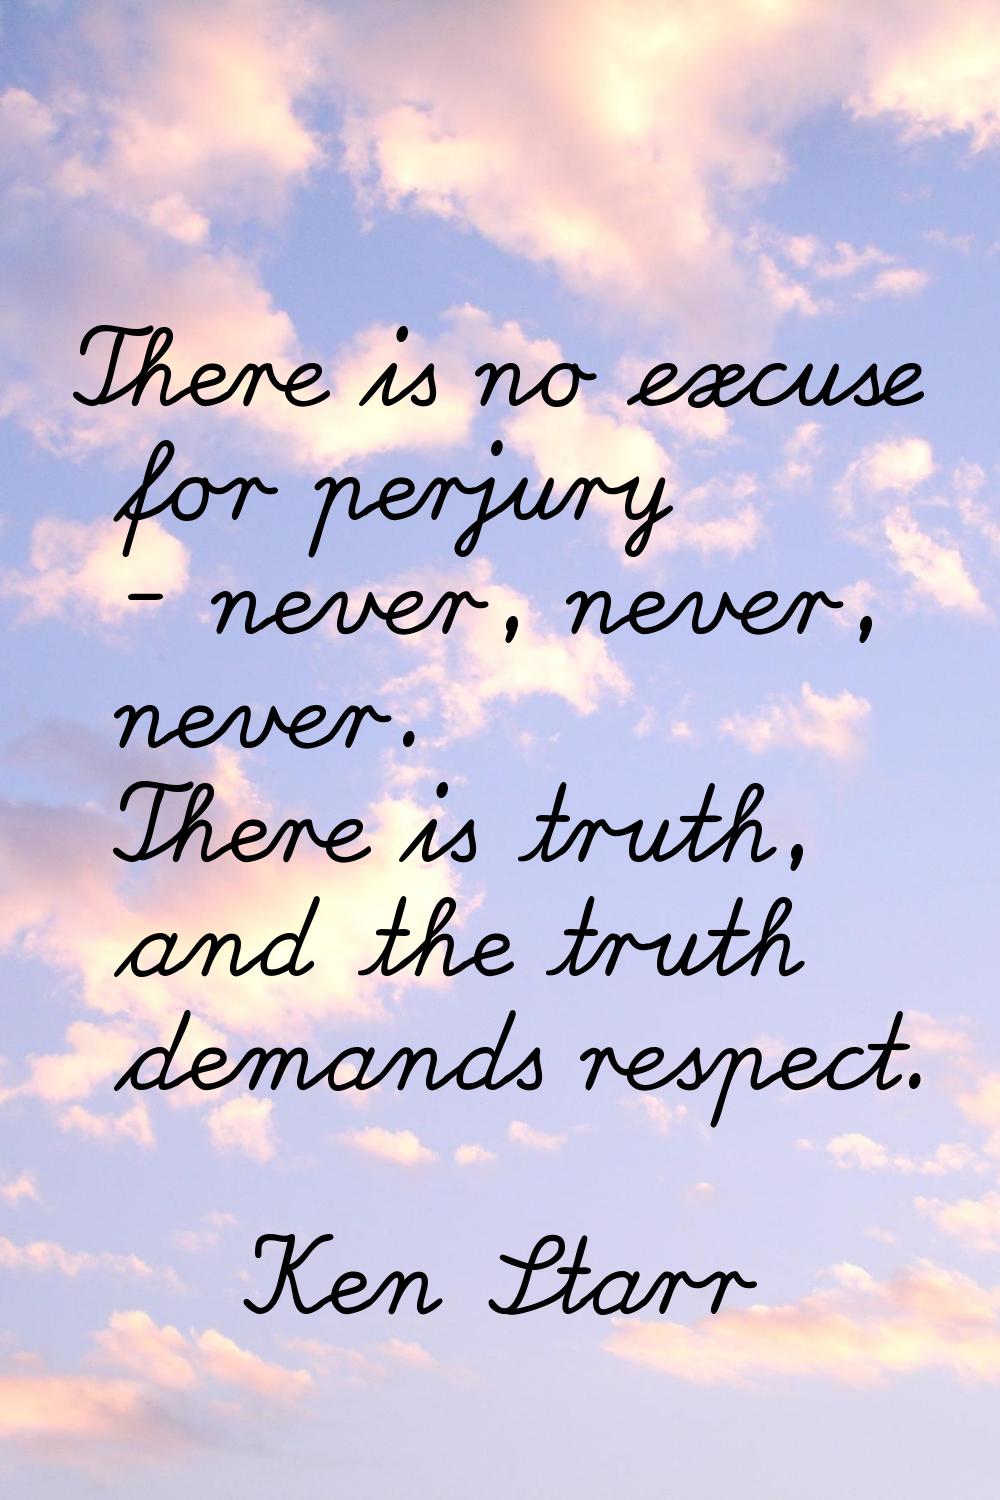 There is no excuse for perjury - never, never, never. There is truth, and the truth demands respect